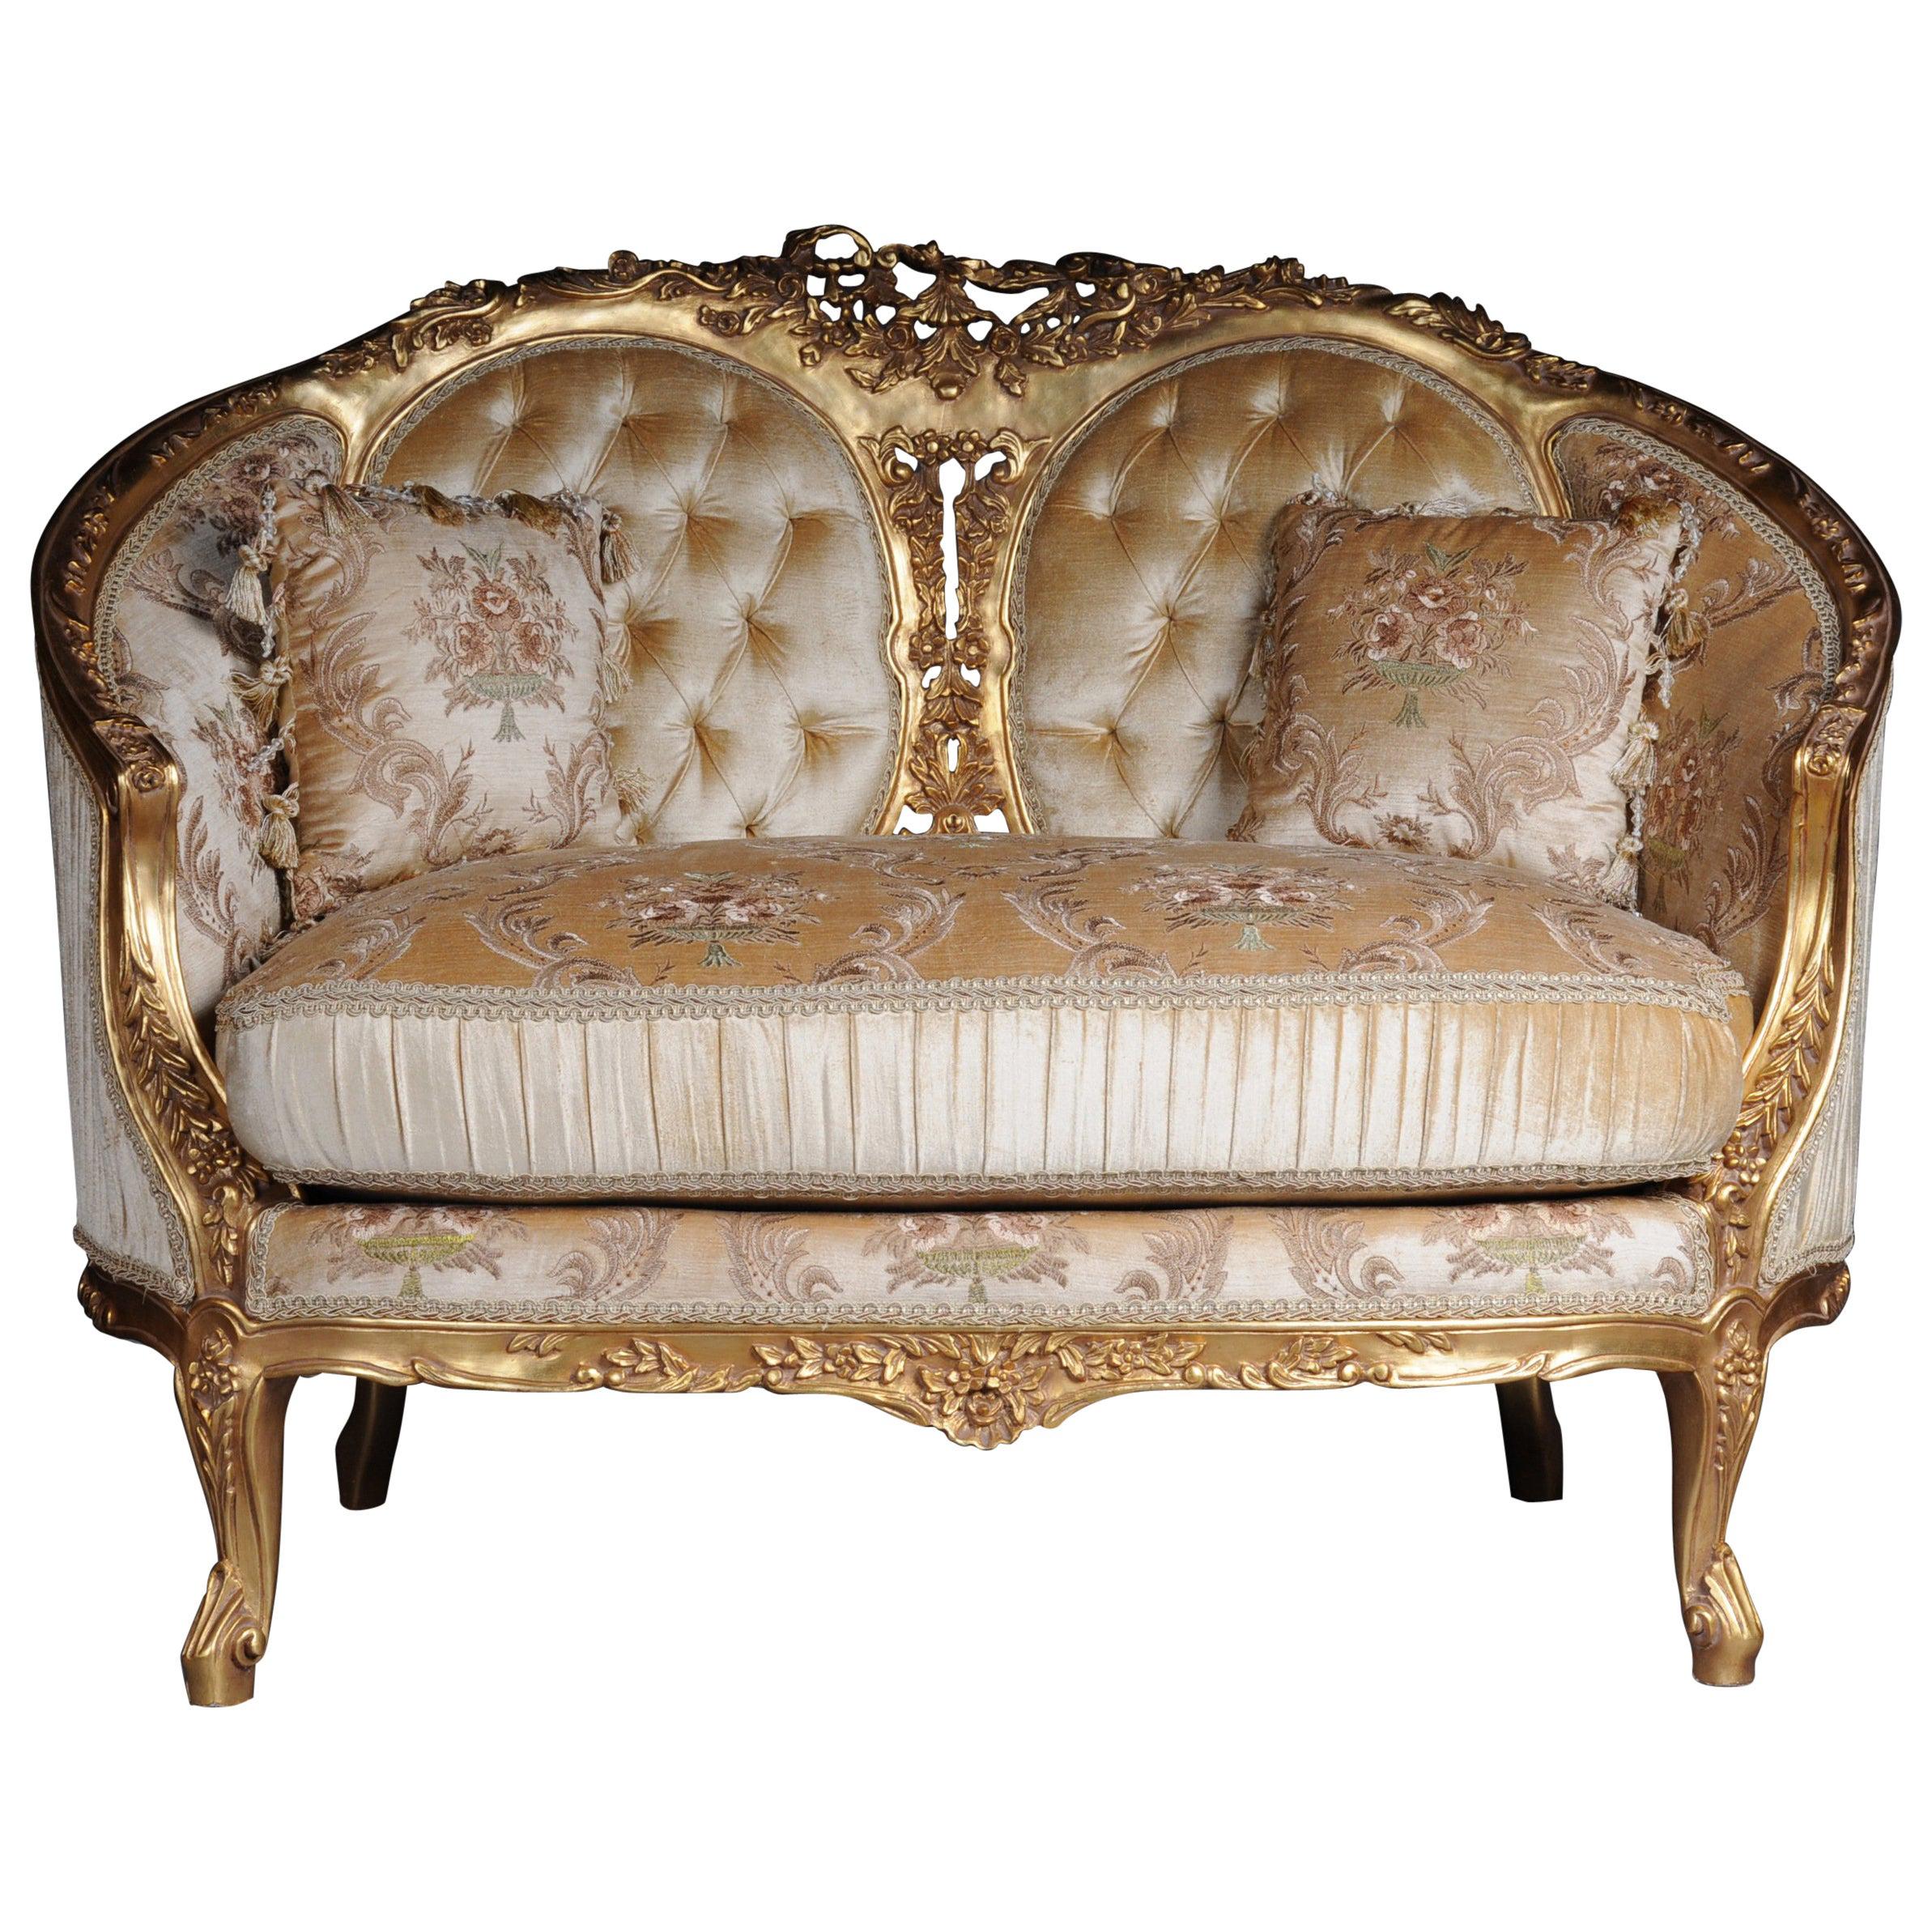 French Sofa, Canapé, Couch in Rococo or Louis XV Style